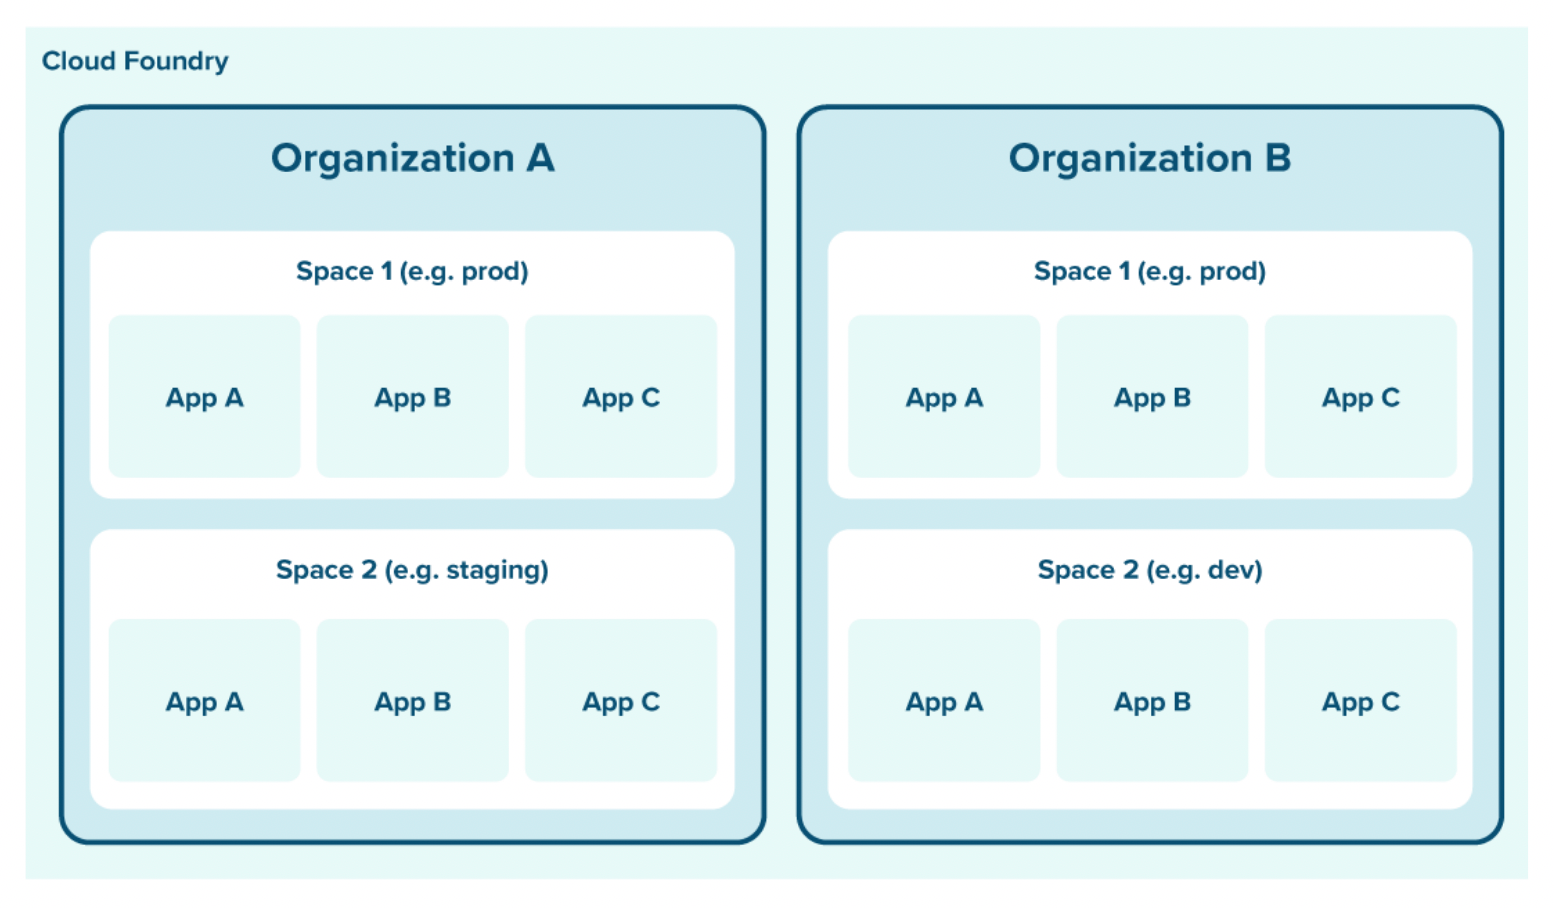 The Cloud Foundry figure shows two different organizations. Organization A is divided into product and staging, and Organization B is divided into product and development.